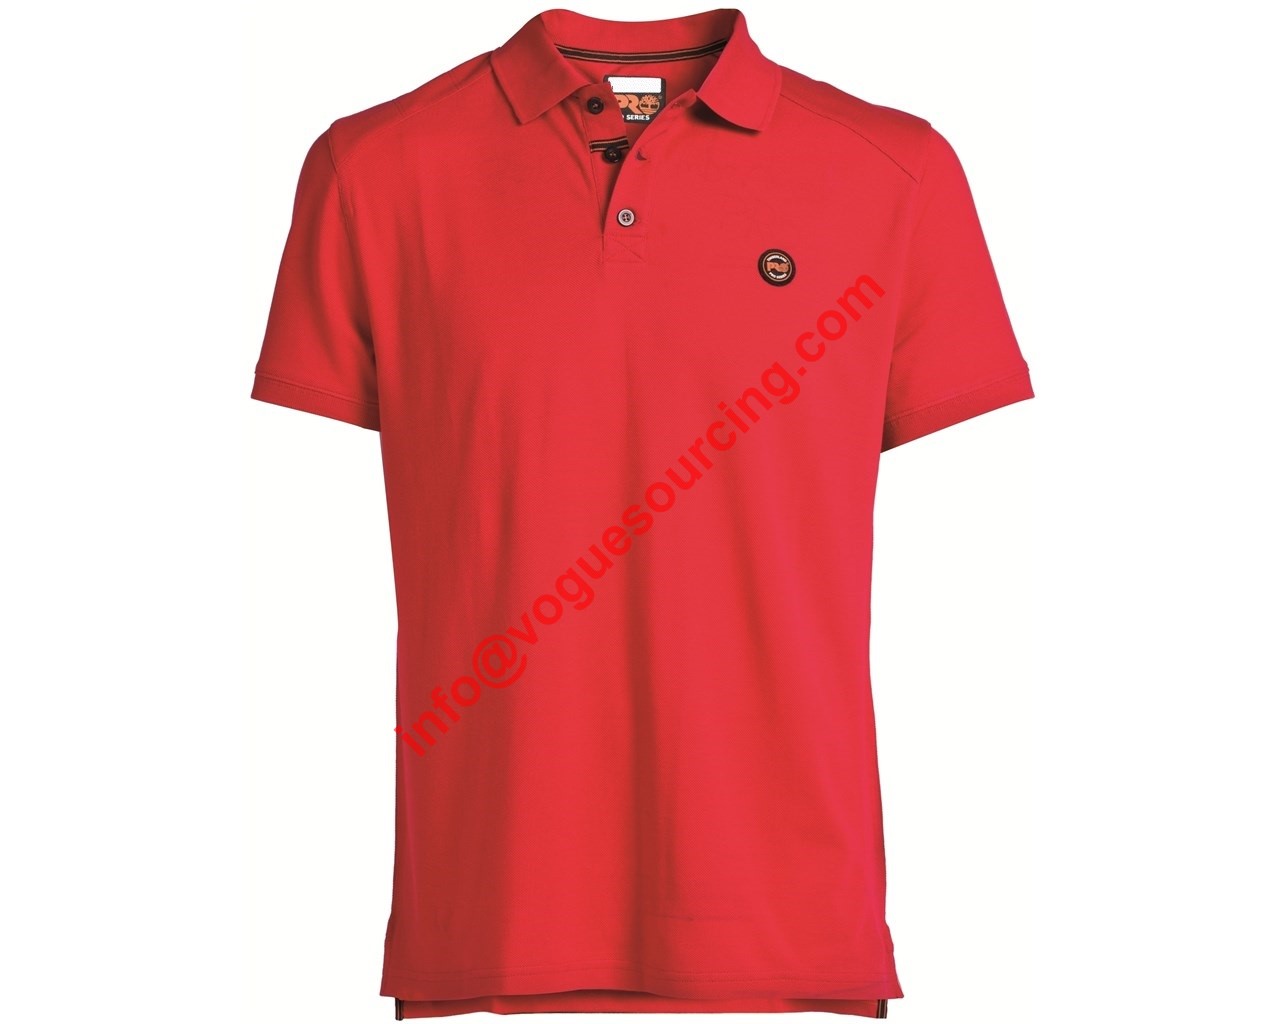 pique-polo-t-shirts-manufacturers-suppliers-exporters-voguesourcing-tirupur-india